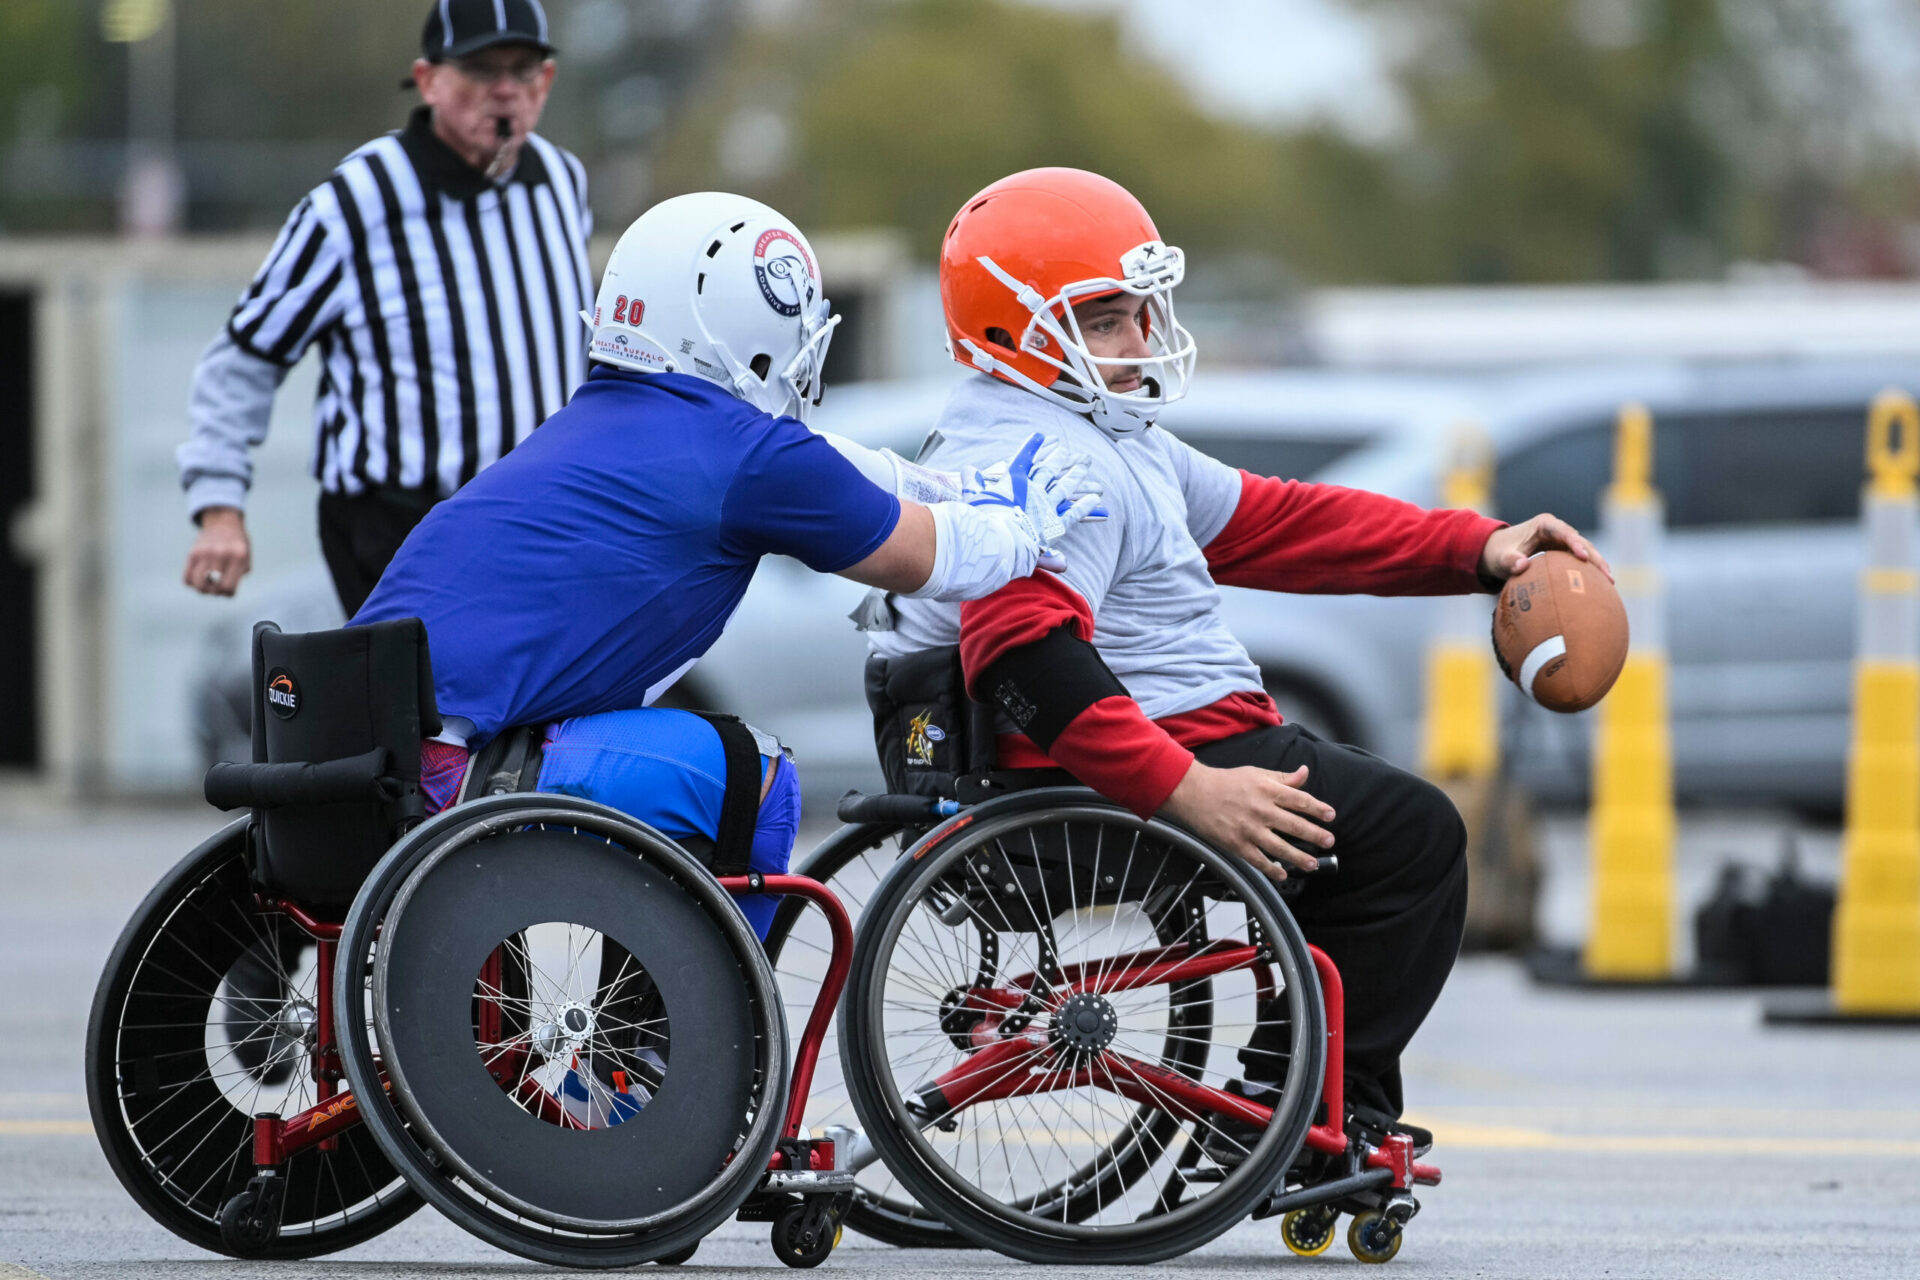 USA Wheelchair Football Tournament for Move United outside Arrowhead Stadium.
(Photo by Reed Hoffmann on 10/29/21)

NIKON D780, Aperture Priority, SUNNY white balance, ISO 1250, 1/1000 at f/4 in multi-segment metering, +1.0 EV, Nikkor VR 200-400mm f/4G lens at 400mm. Photo copyright Reed Hoffmann.